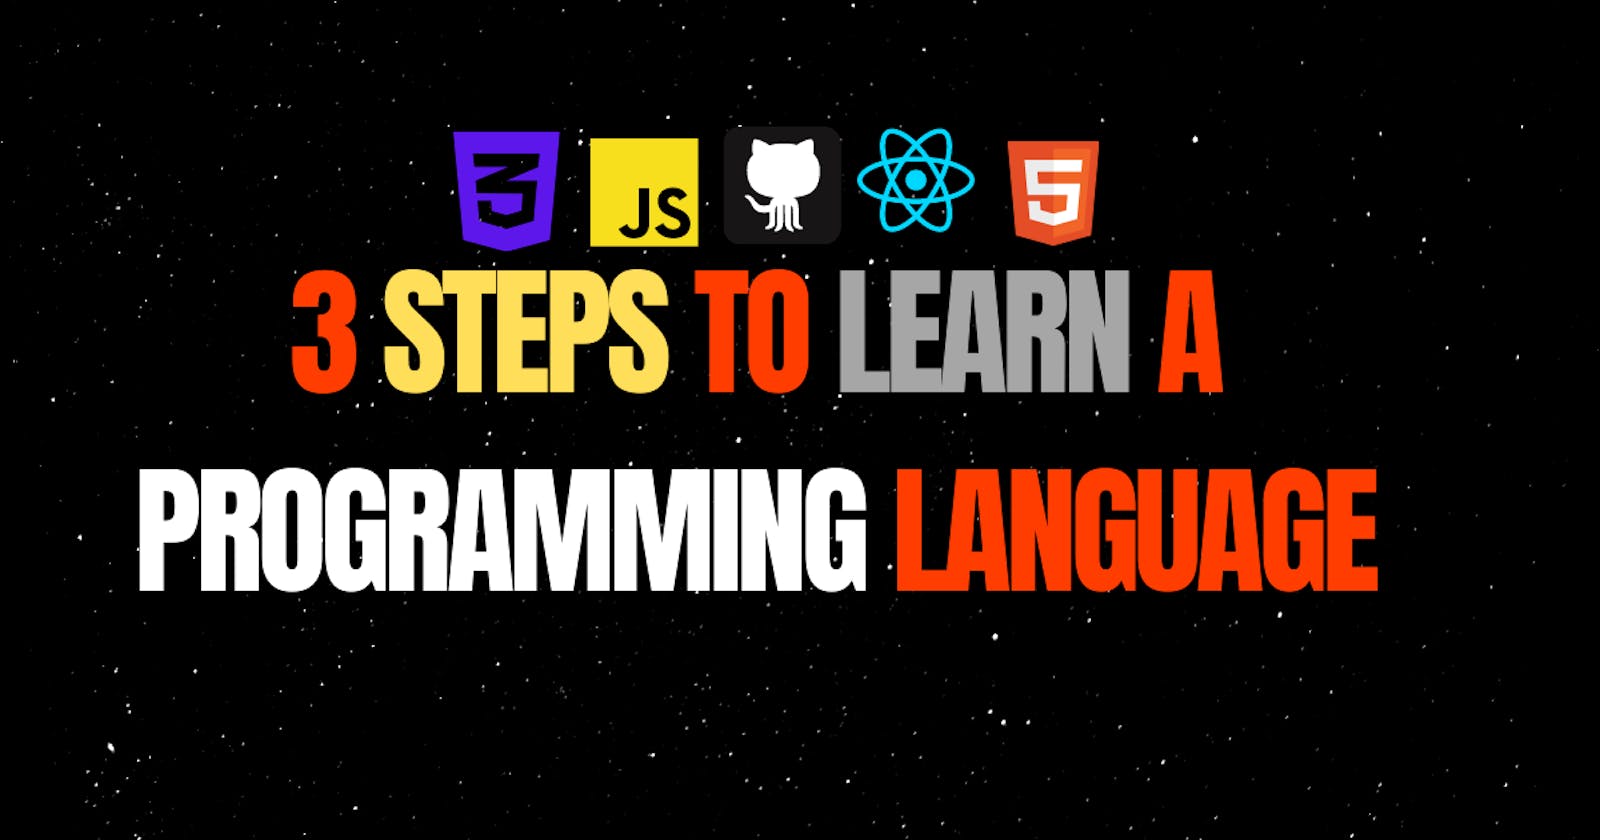 3 Steps to learn a programming language